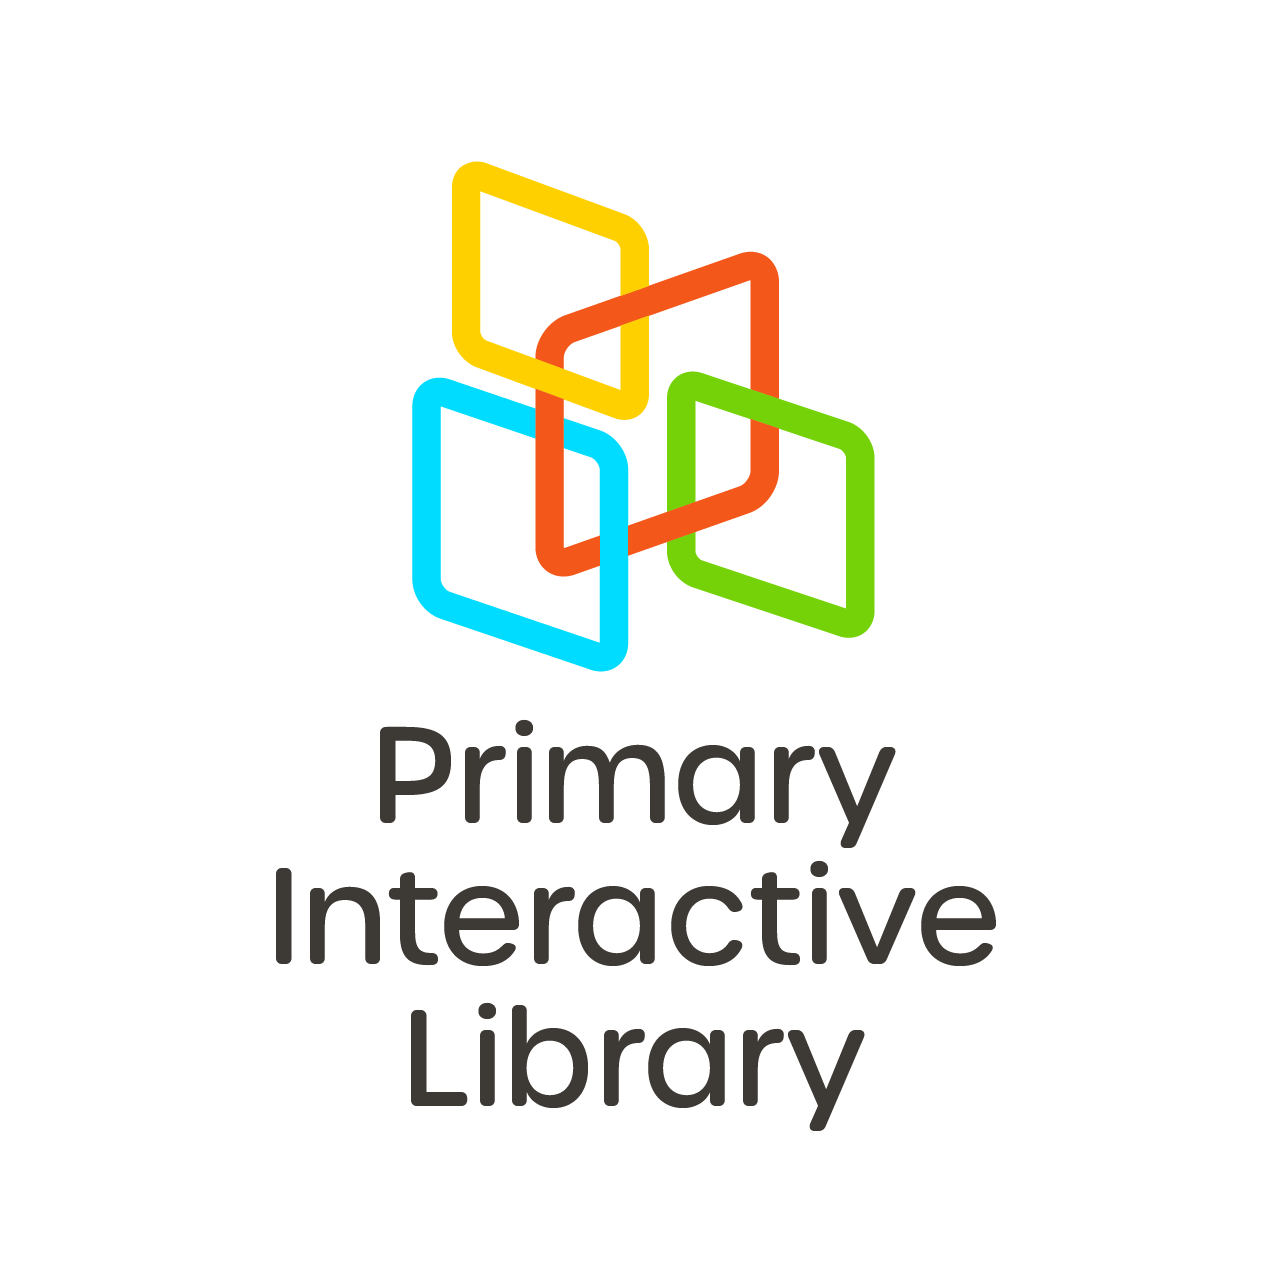 The Primary Interactive Library